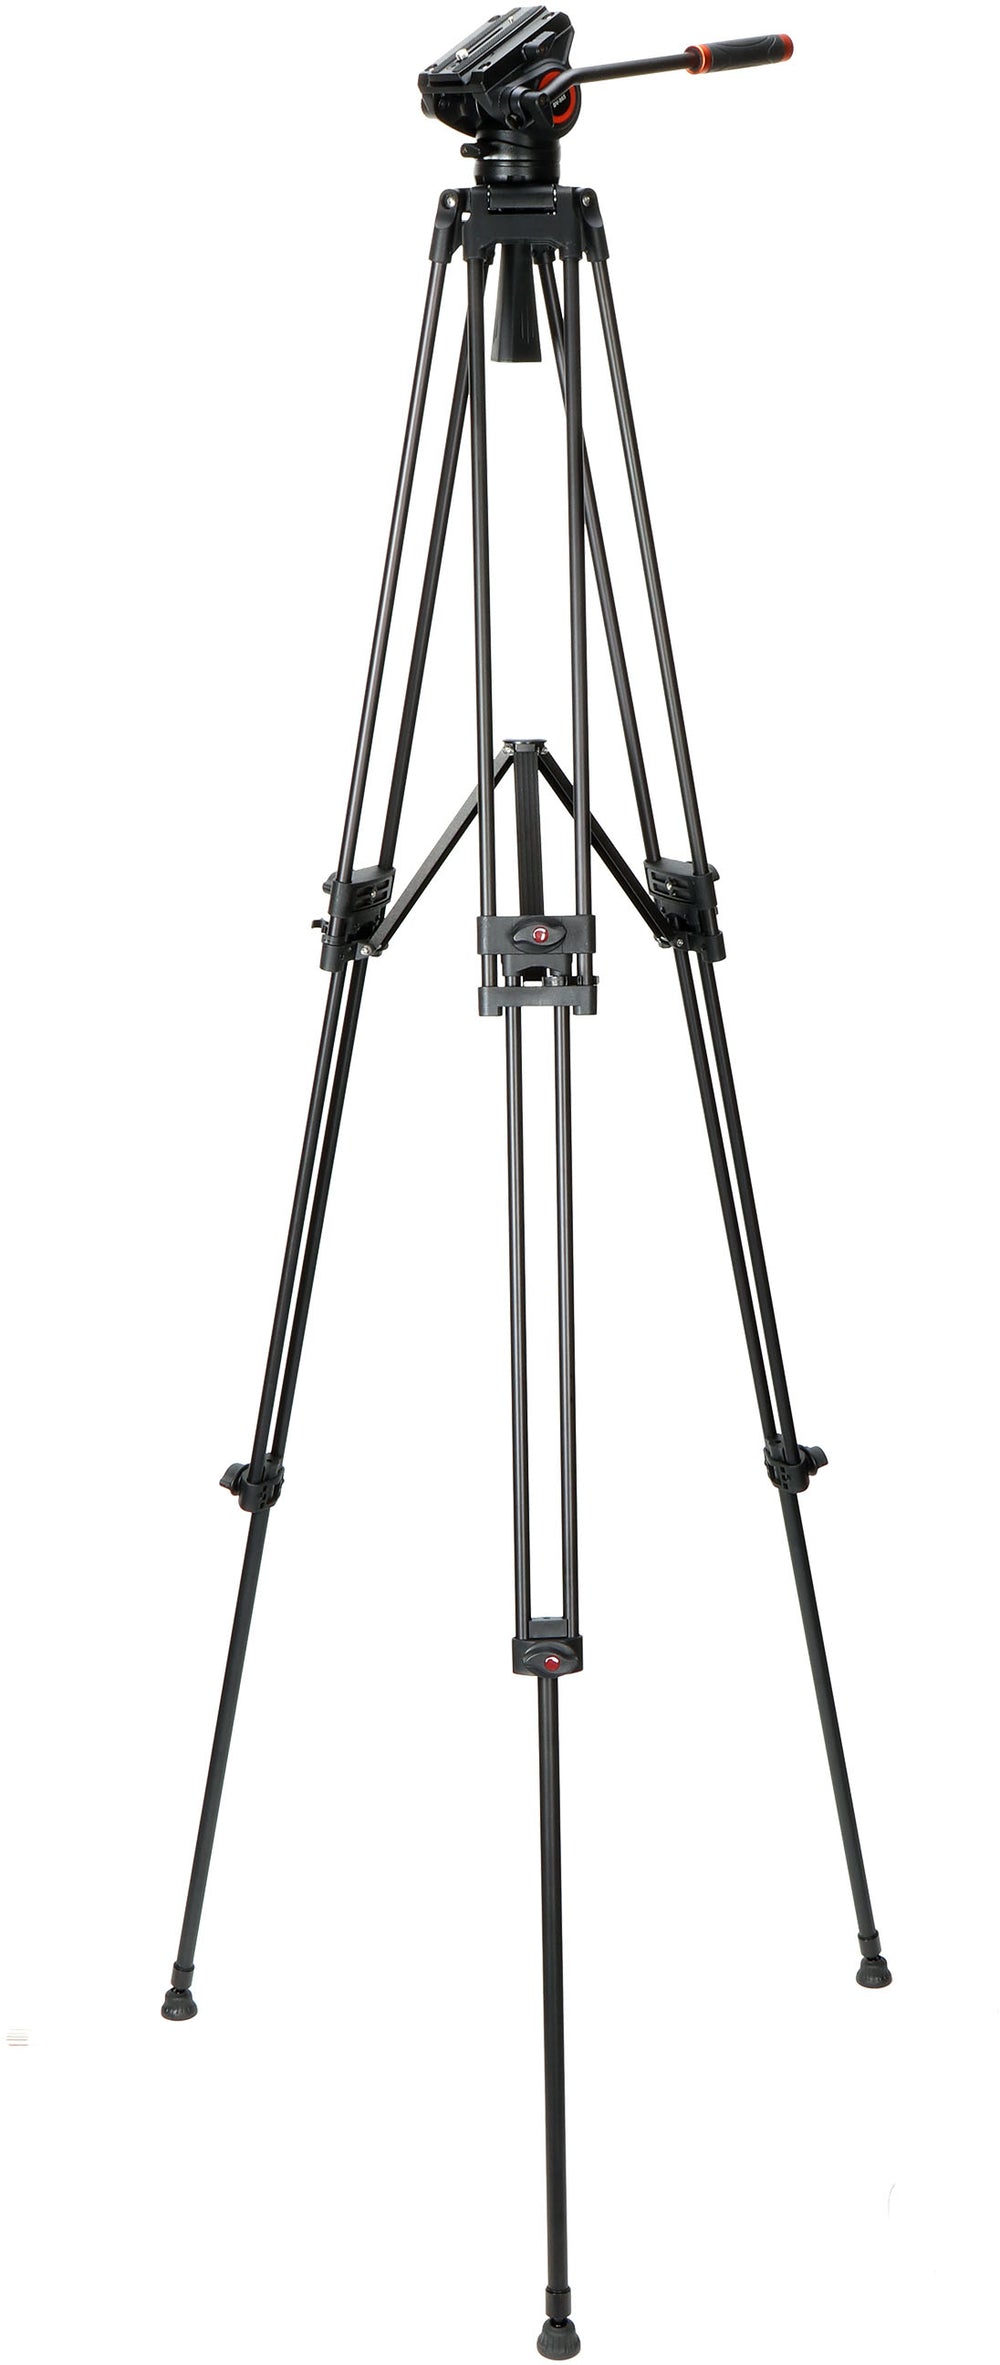 Sunpak - VideoPRO-M5 Professional Fluid Head Tripod for Full Size Camcorders and Cine Cameras_1